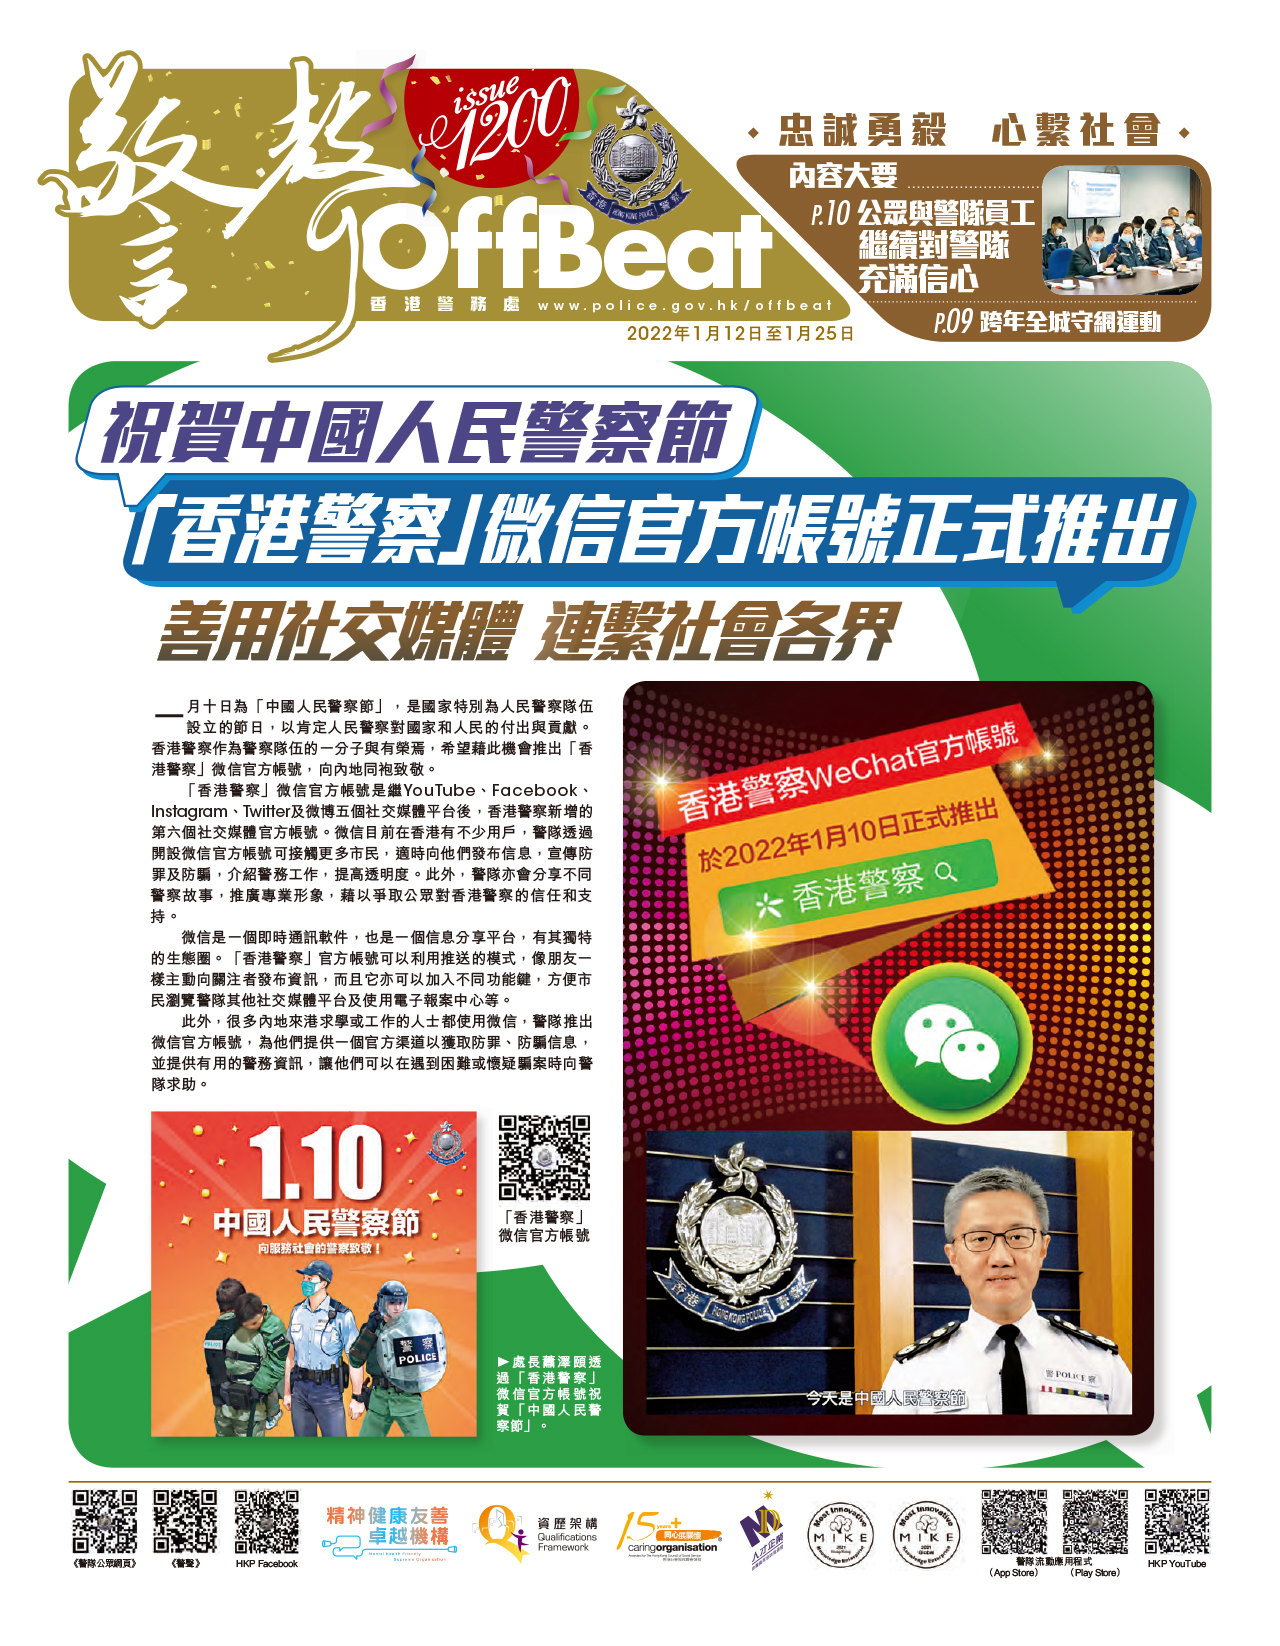 Offbeat Issue 1200 (January 12 – January 25, 2022) 祝賀中國人民 